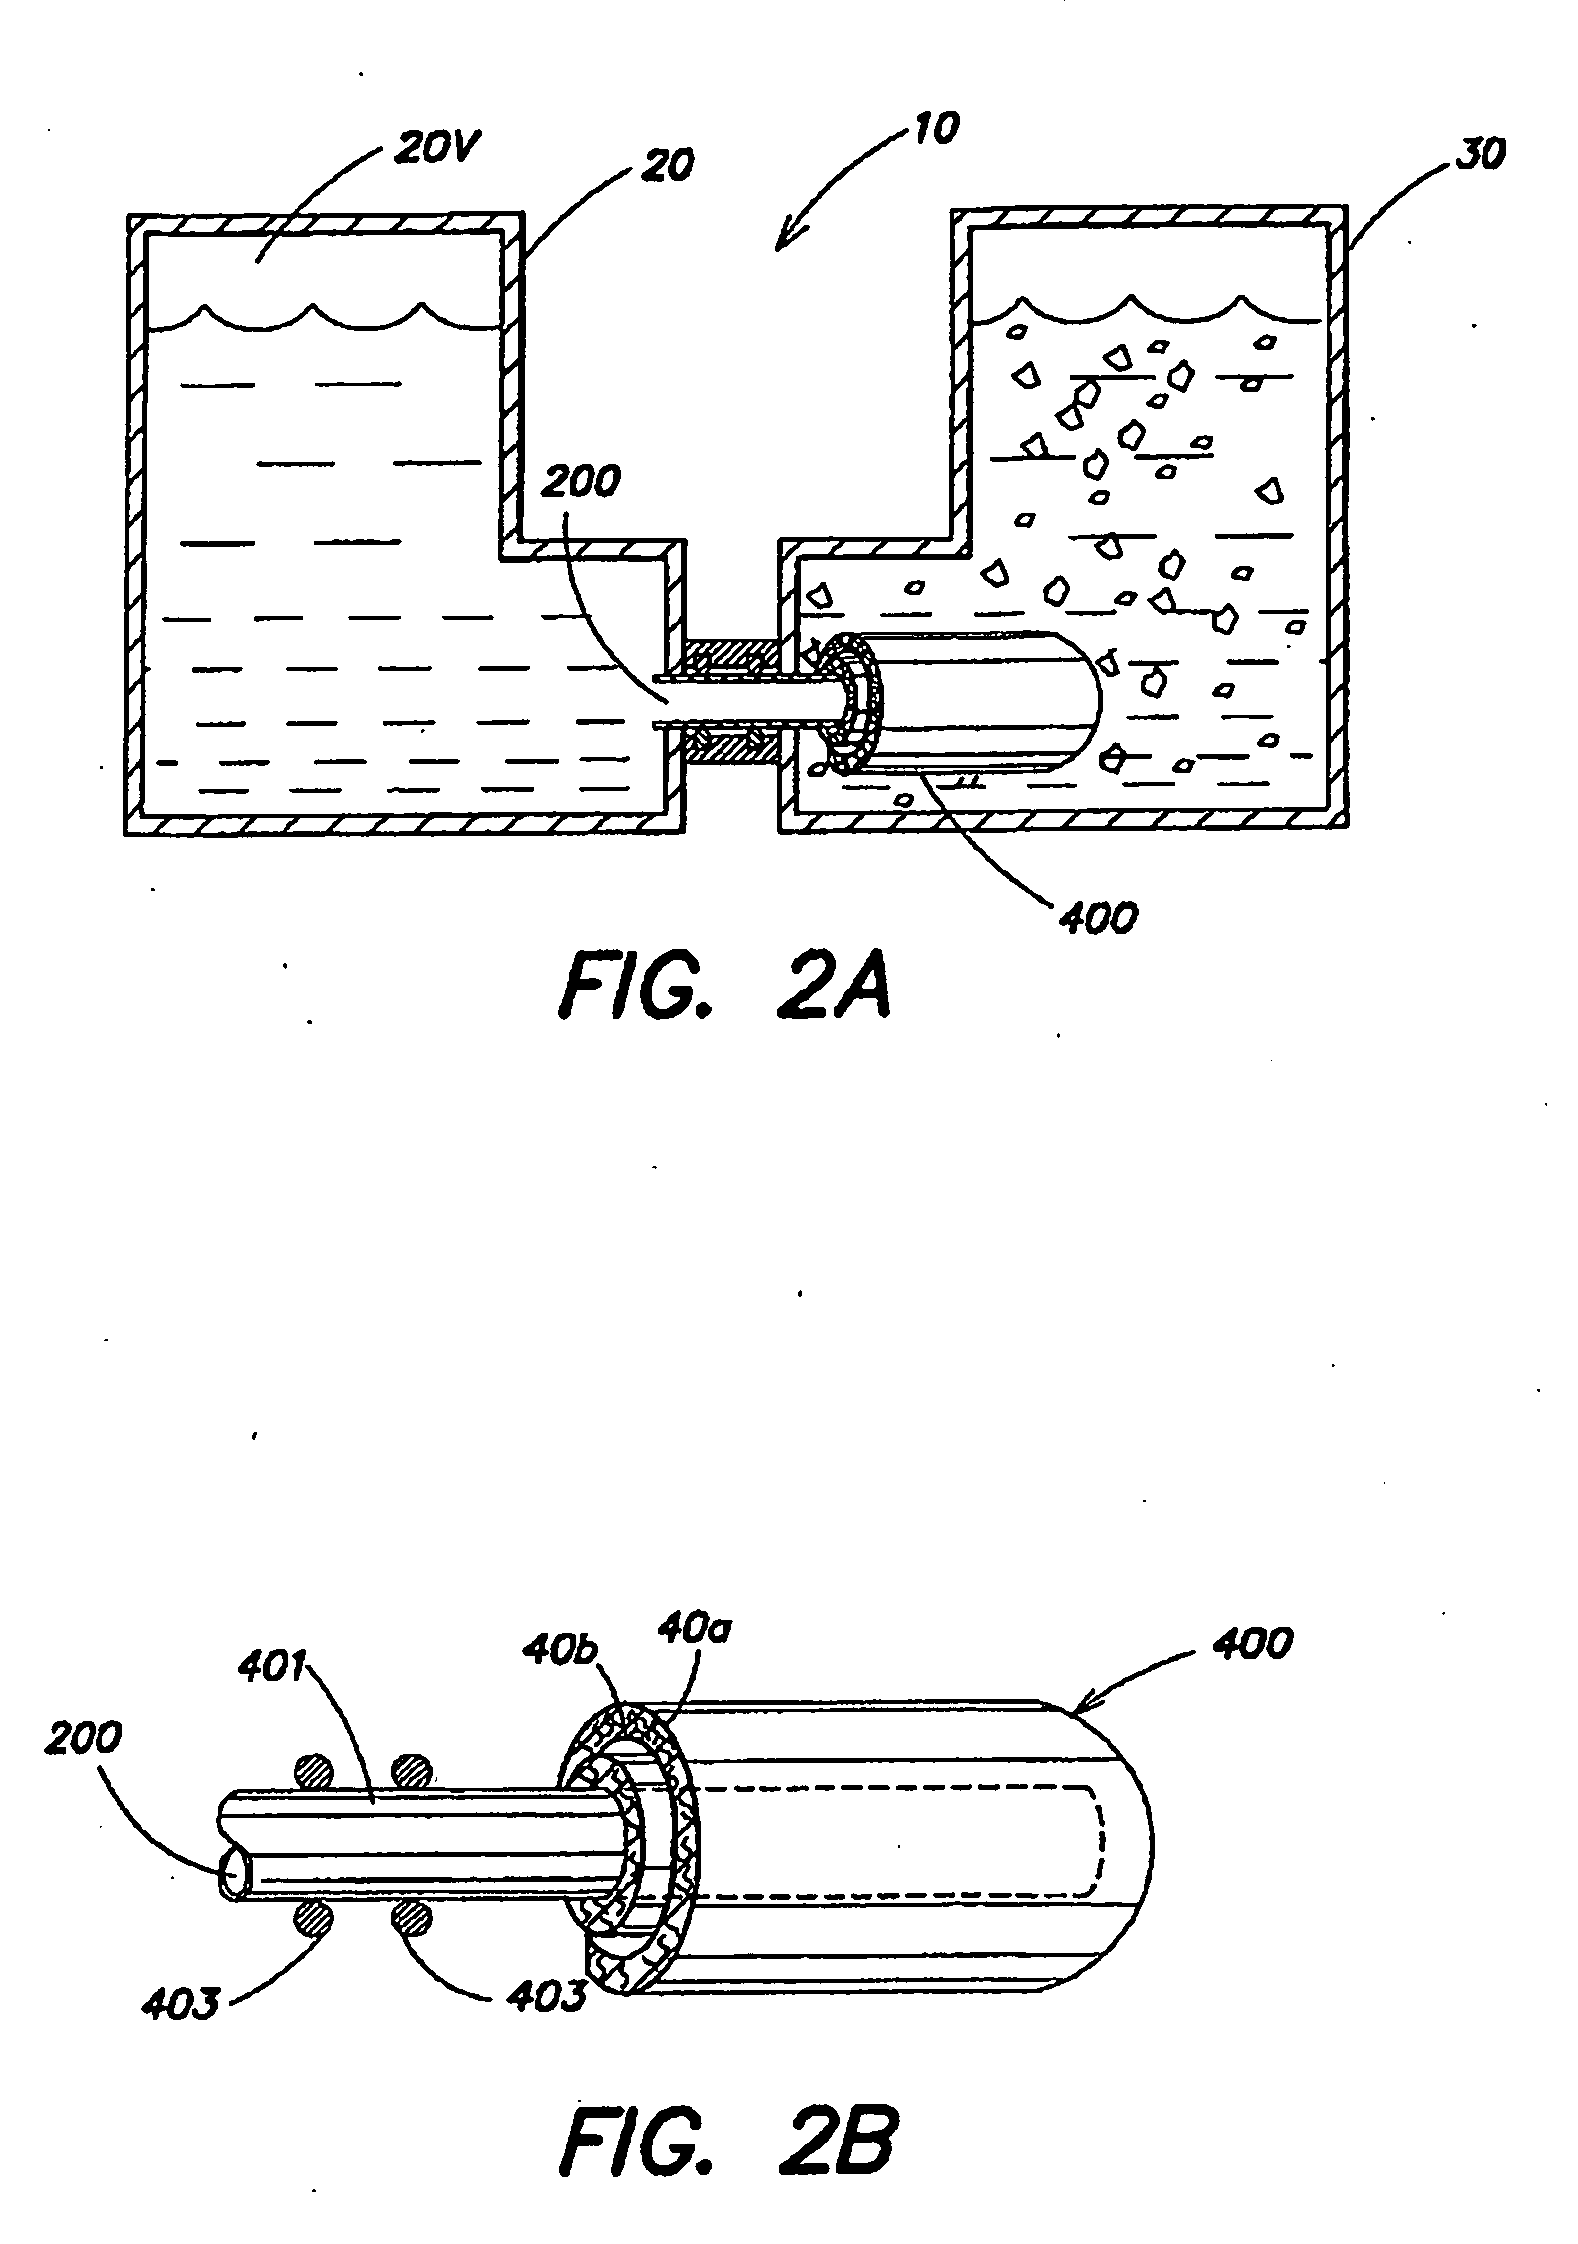 System and method for converting kinetic energy from brownian motion of gases or liquids to useful energy, force and work